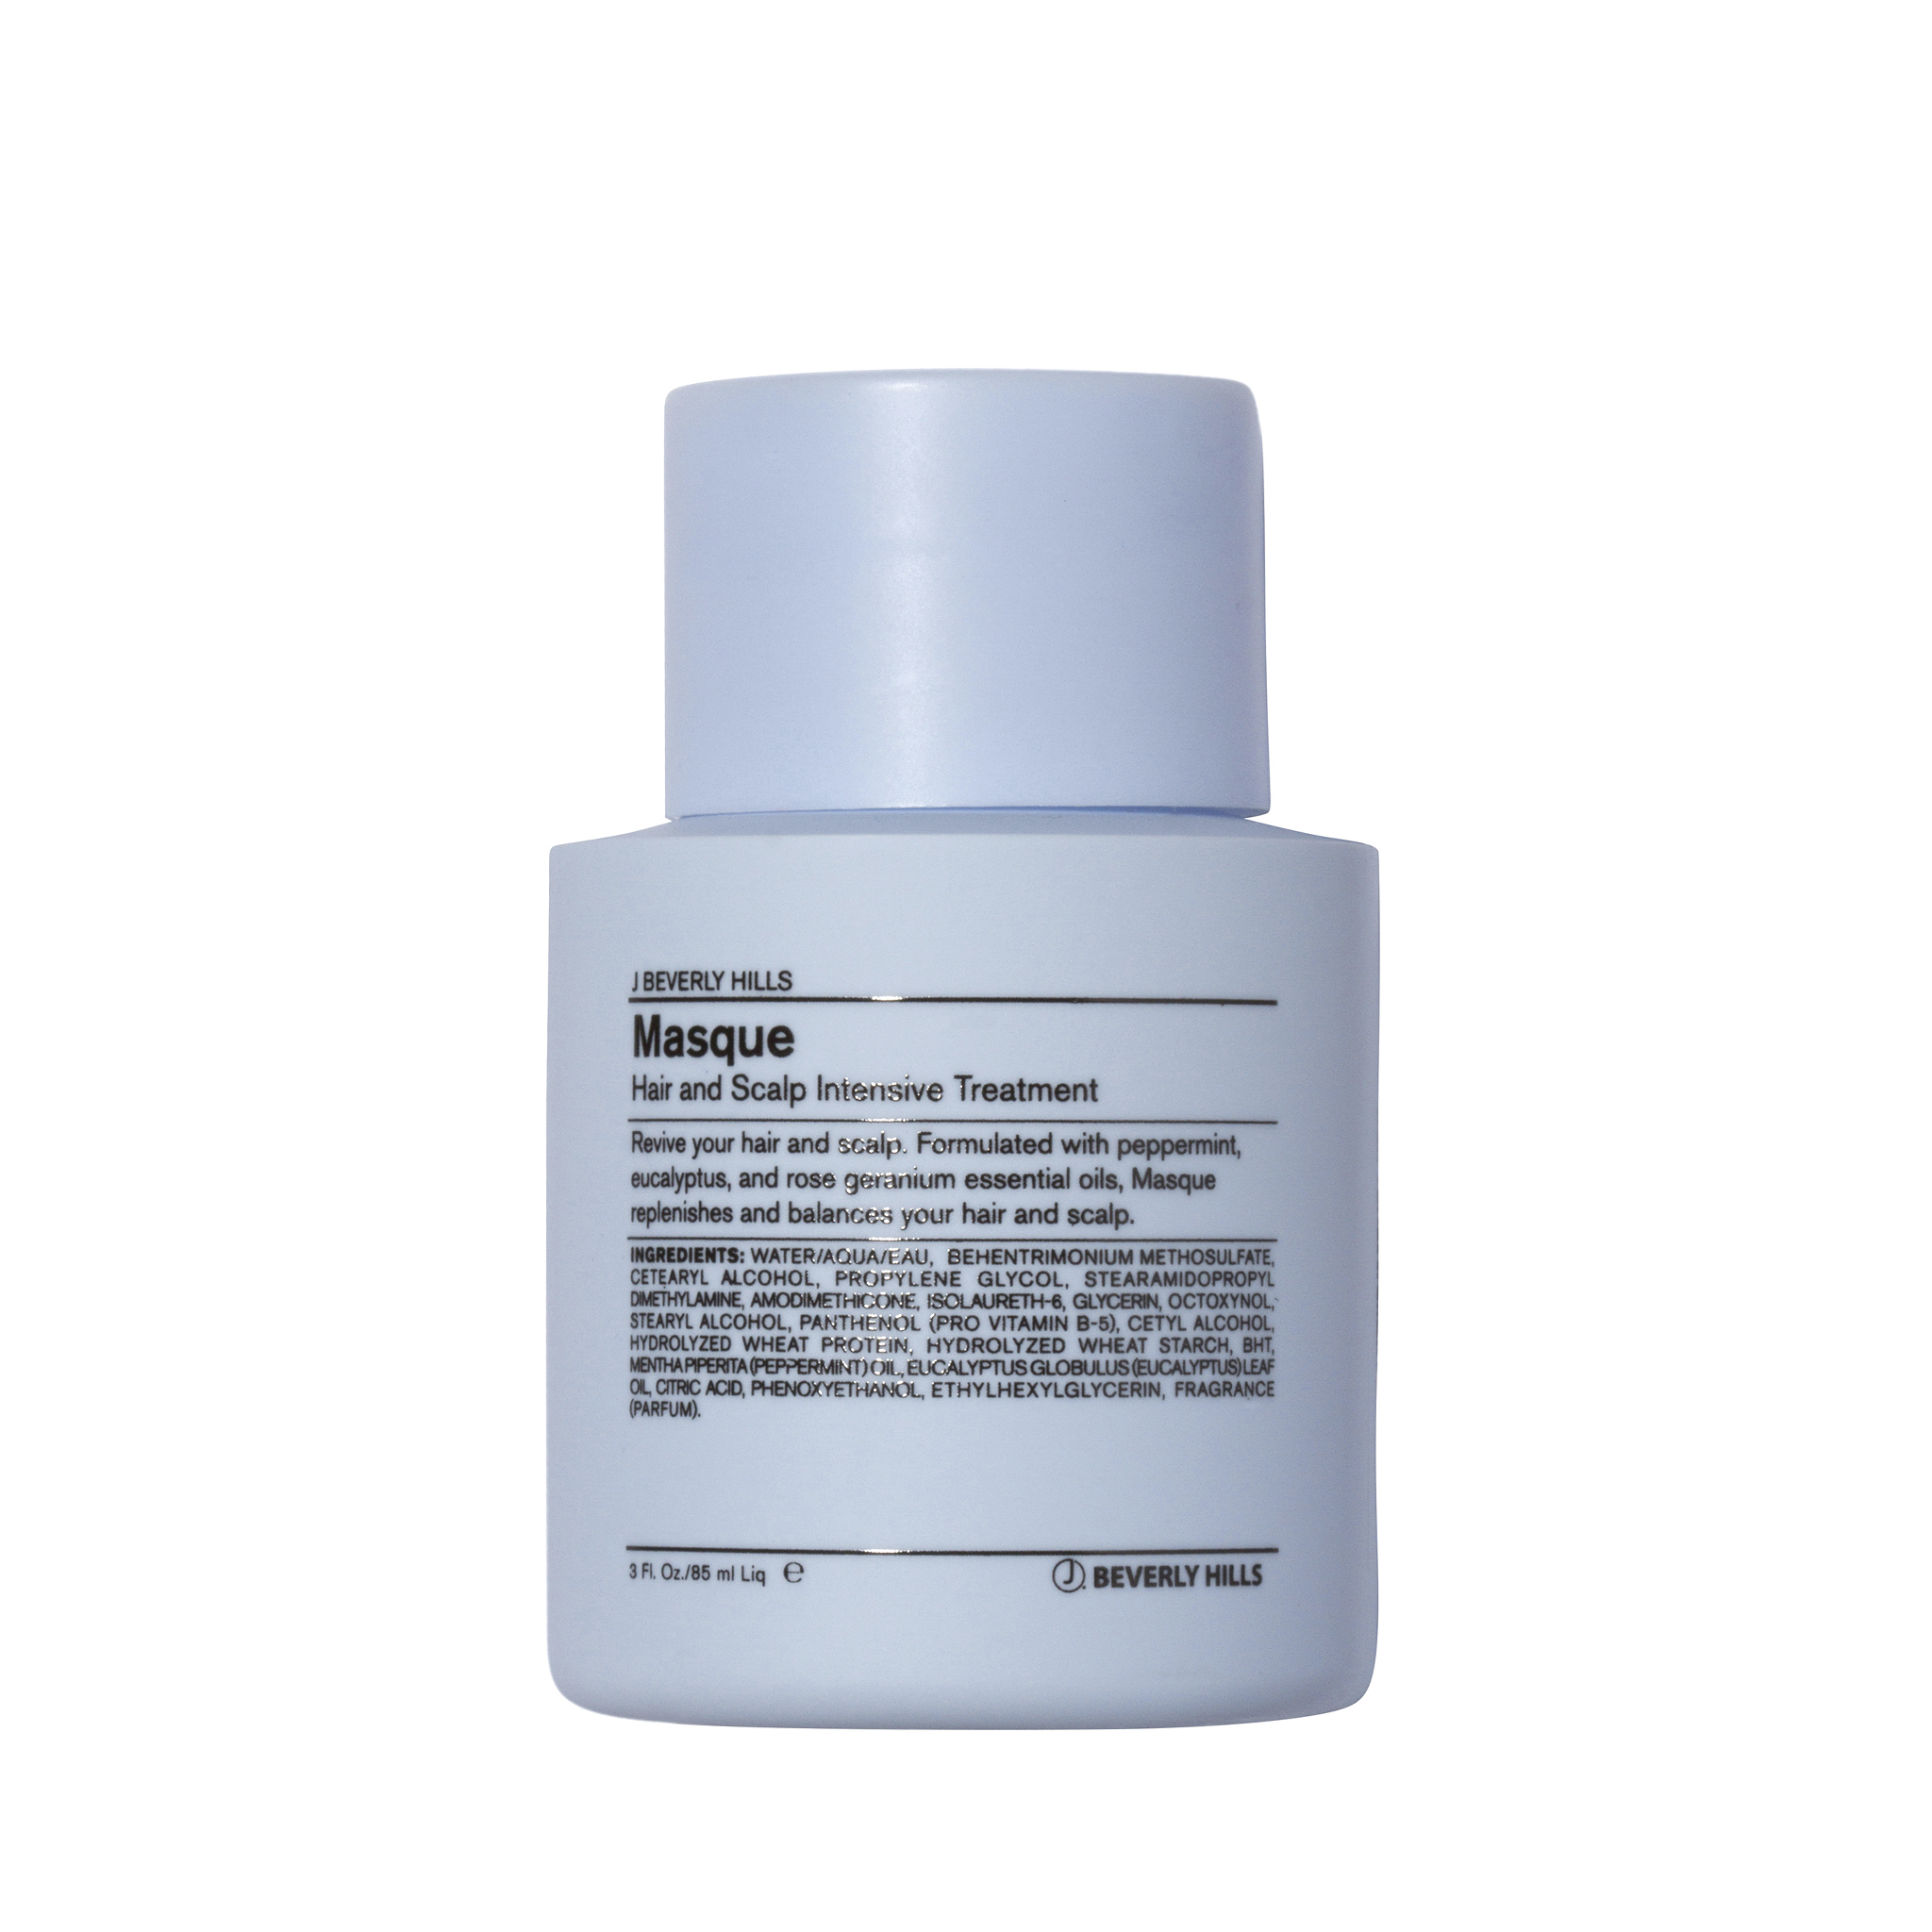 MASQUE intensive hair and scalp treatment